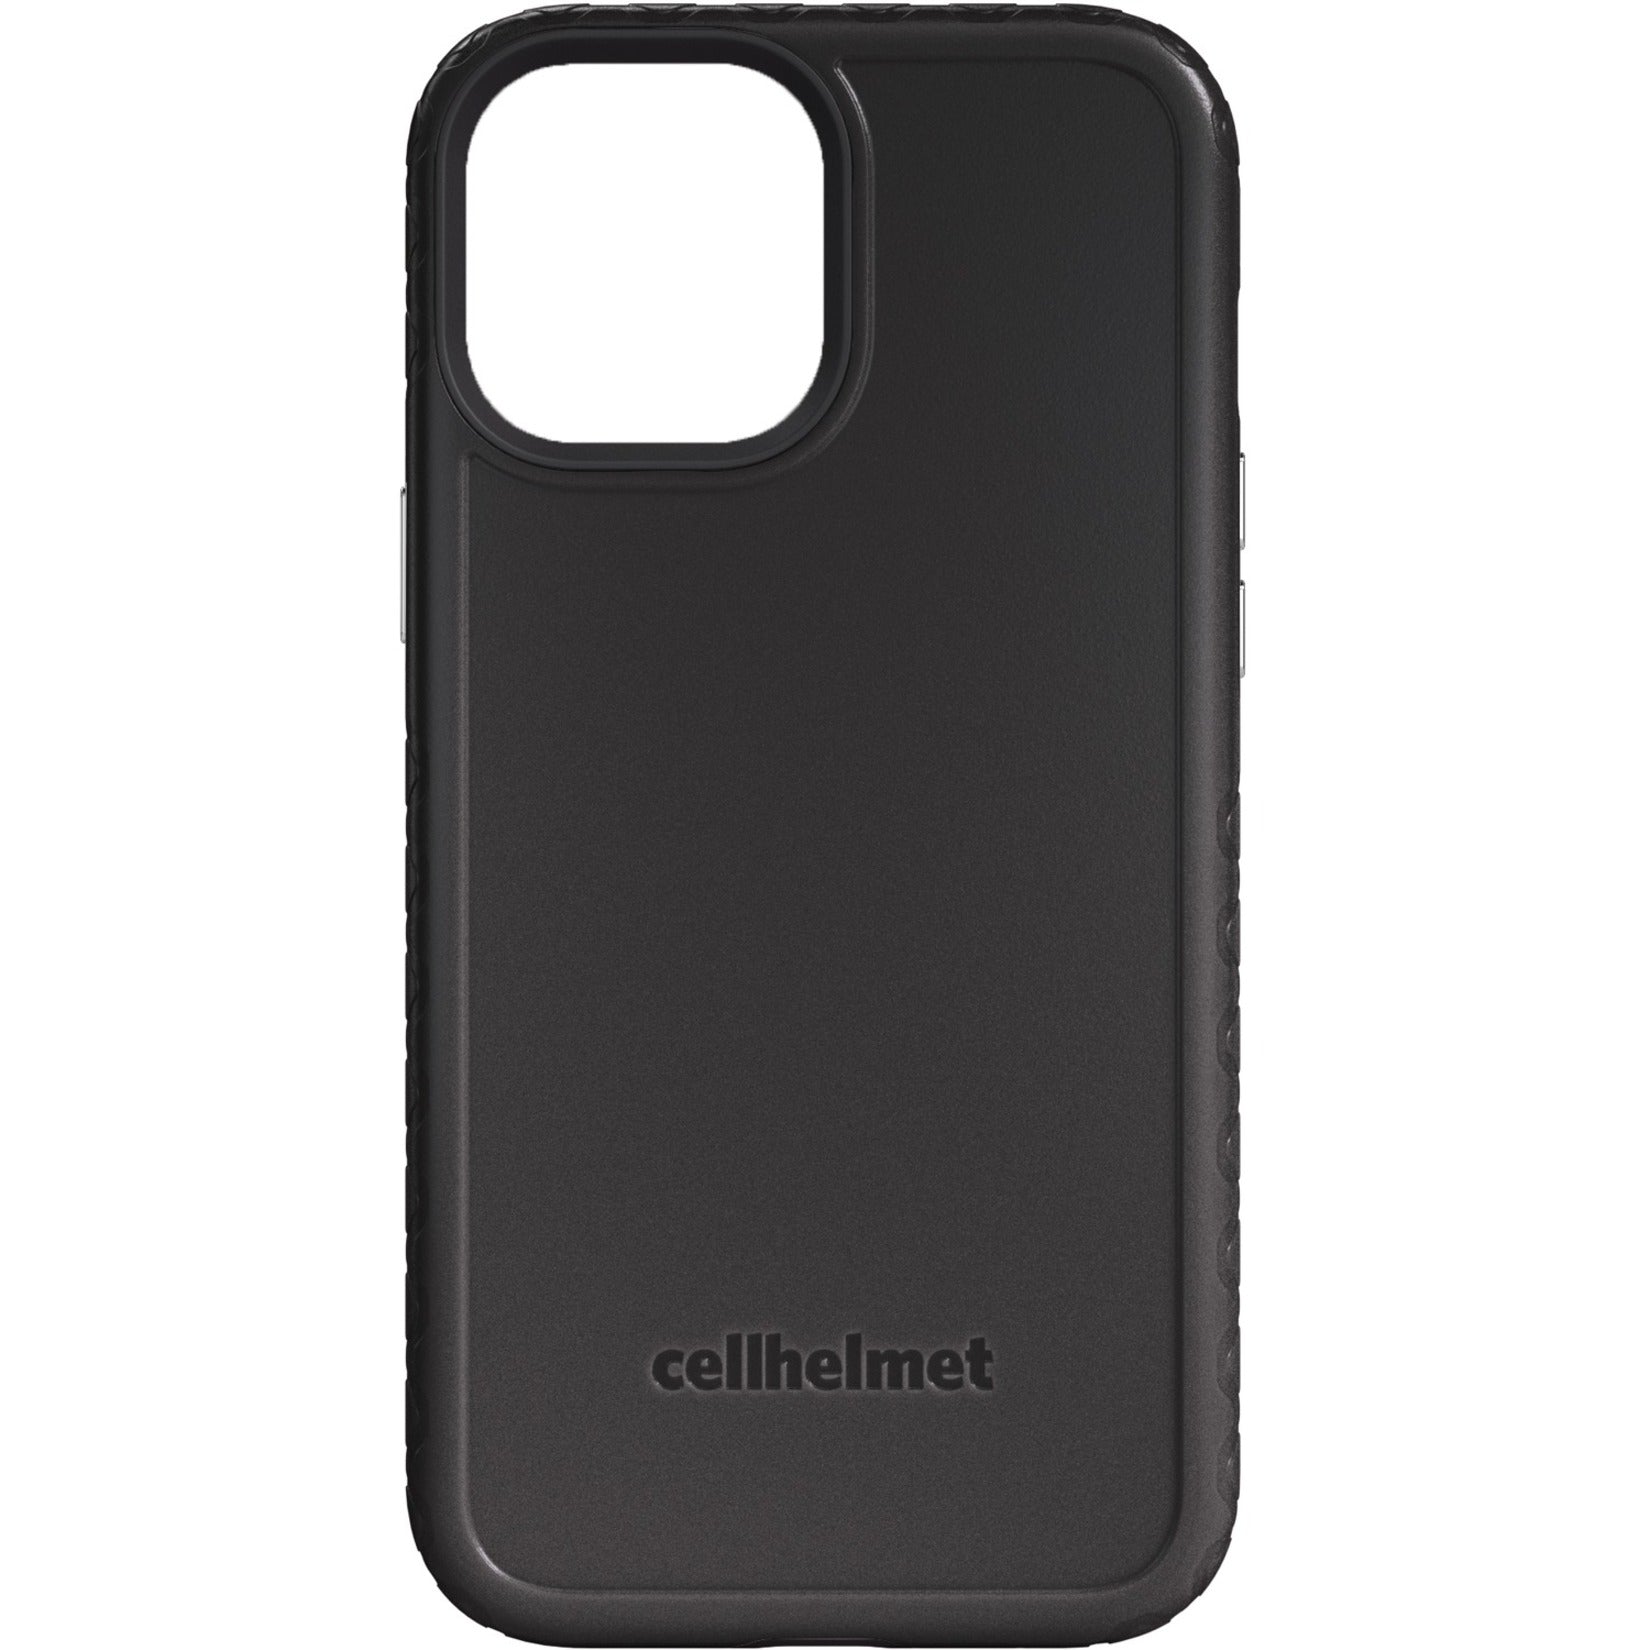 Cellhelmet C-FORT-i6.7-2020-OB Fortitude Series for iPhone 12 Pro Max (Onyx Black), Rugged Case with Cross Pattern